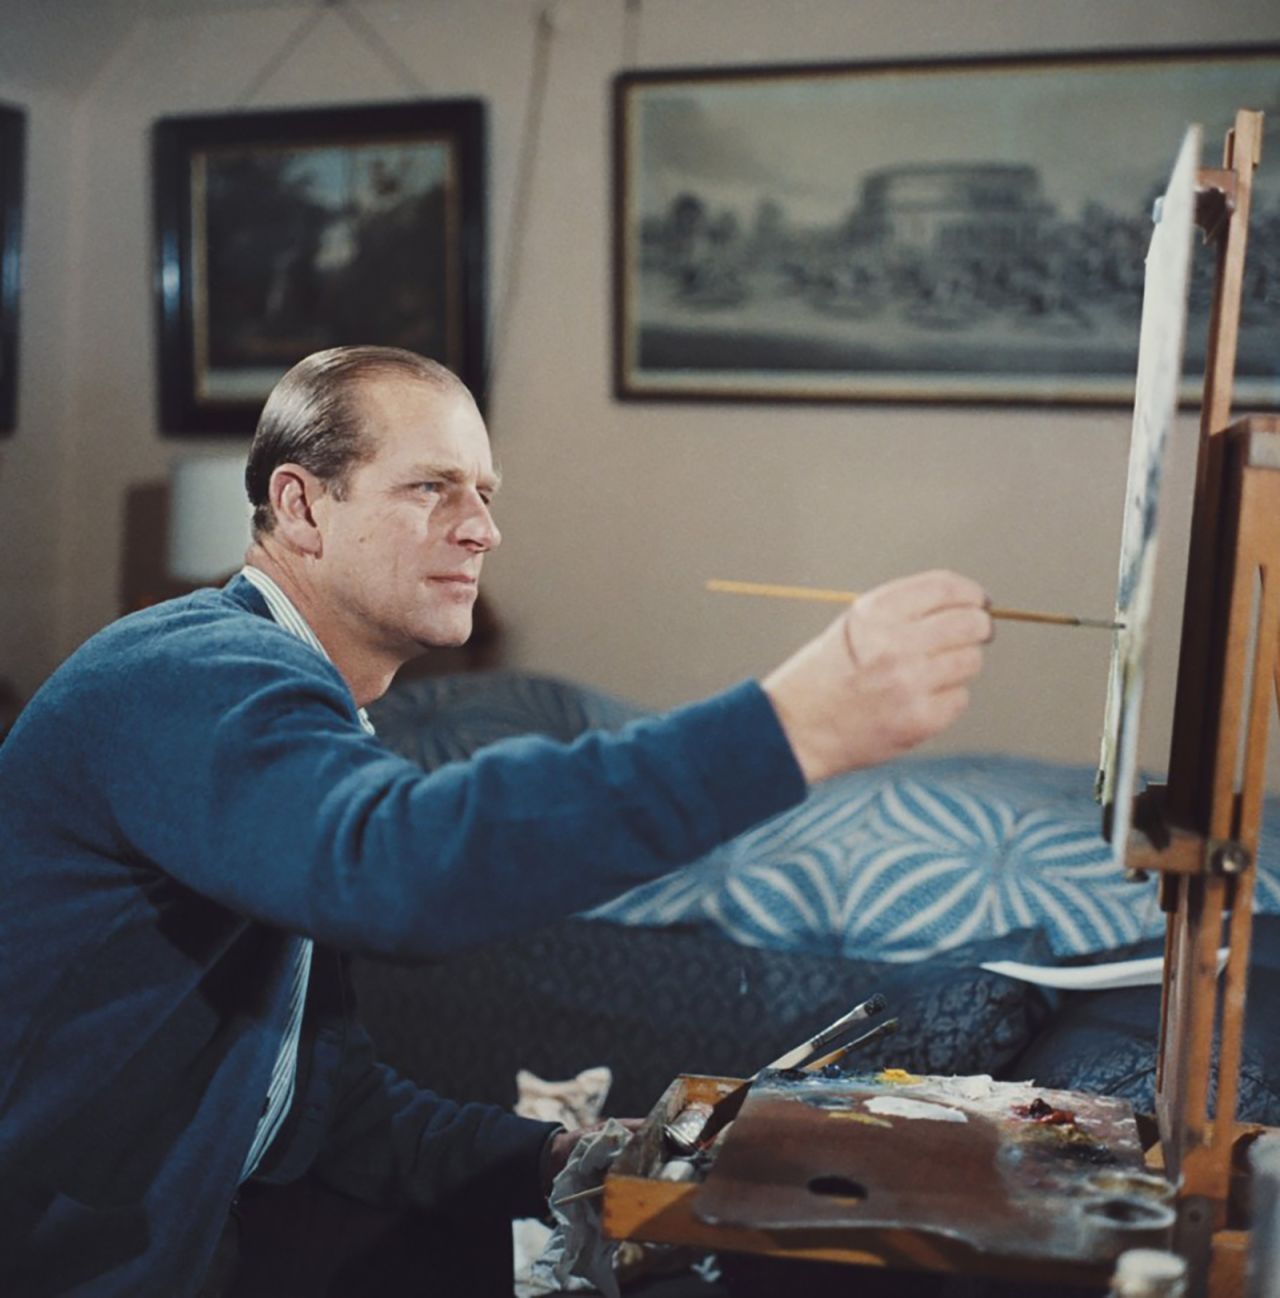 Prince Philip paints during the filming of the documentary "Royal Family" in 1969.